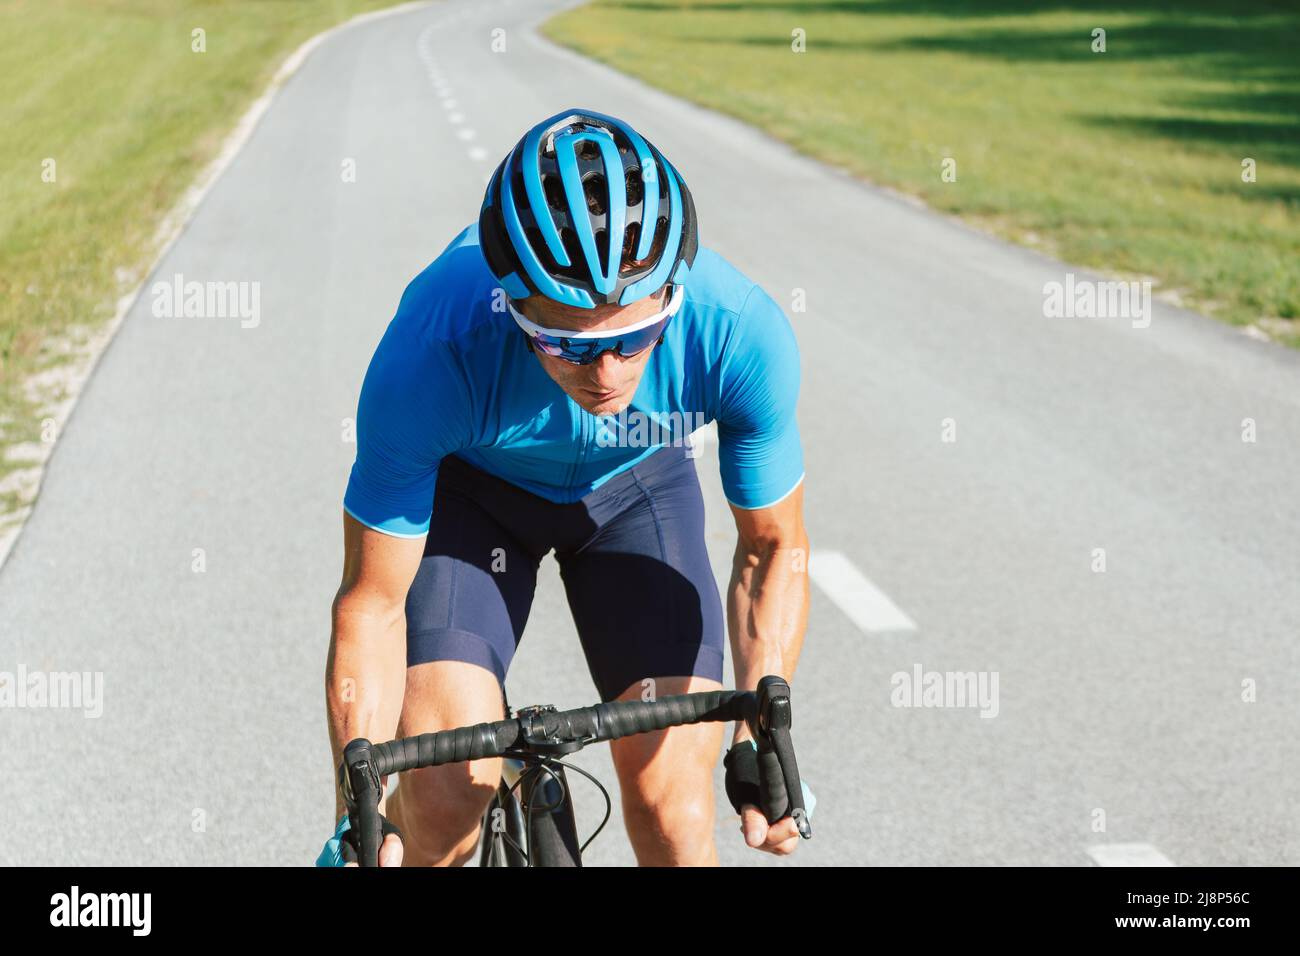 Muscular man, professional racing bicyclist sprint cycling, with posterior raised out of the saddle and pedaling hard Stock Photo